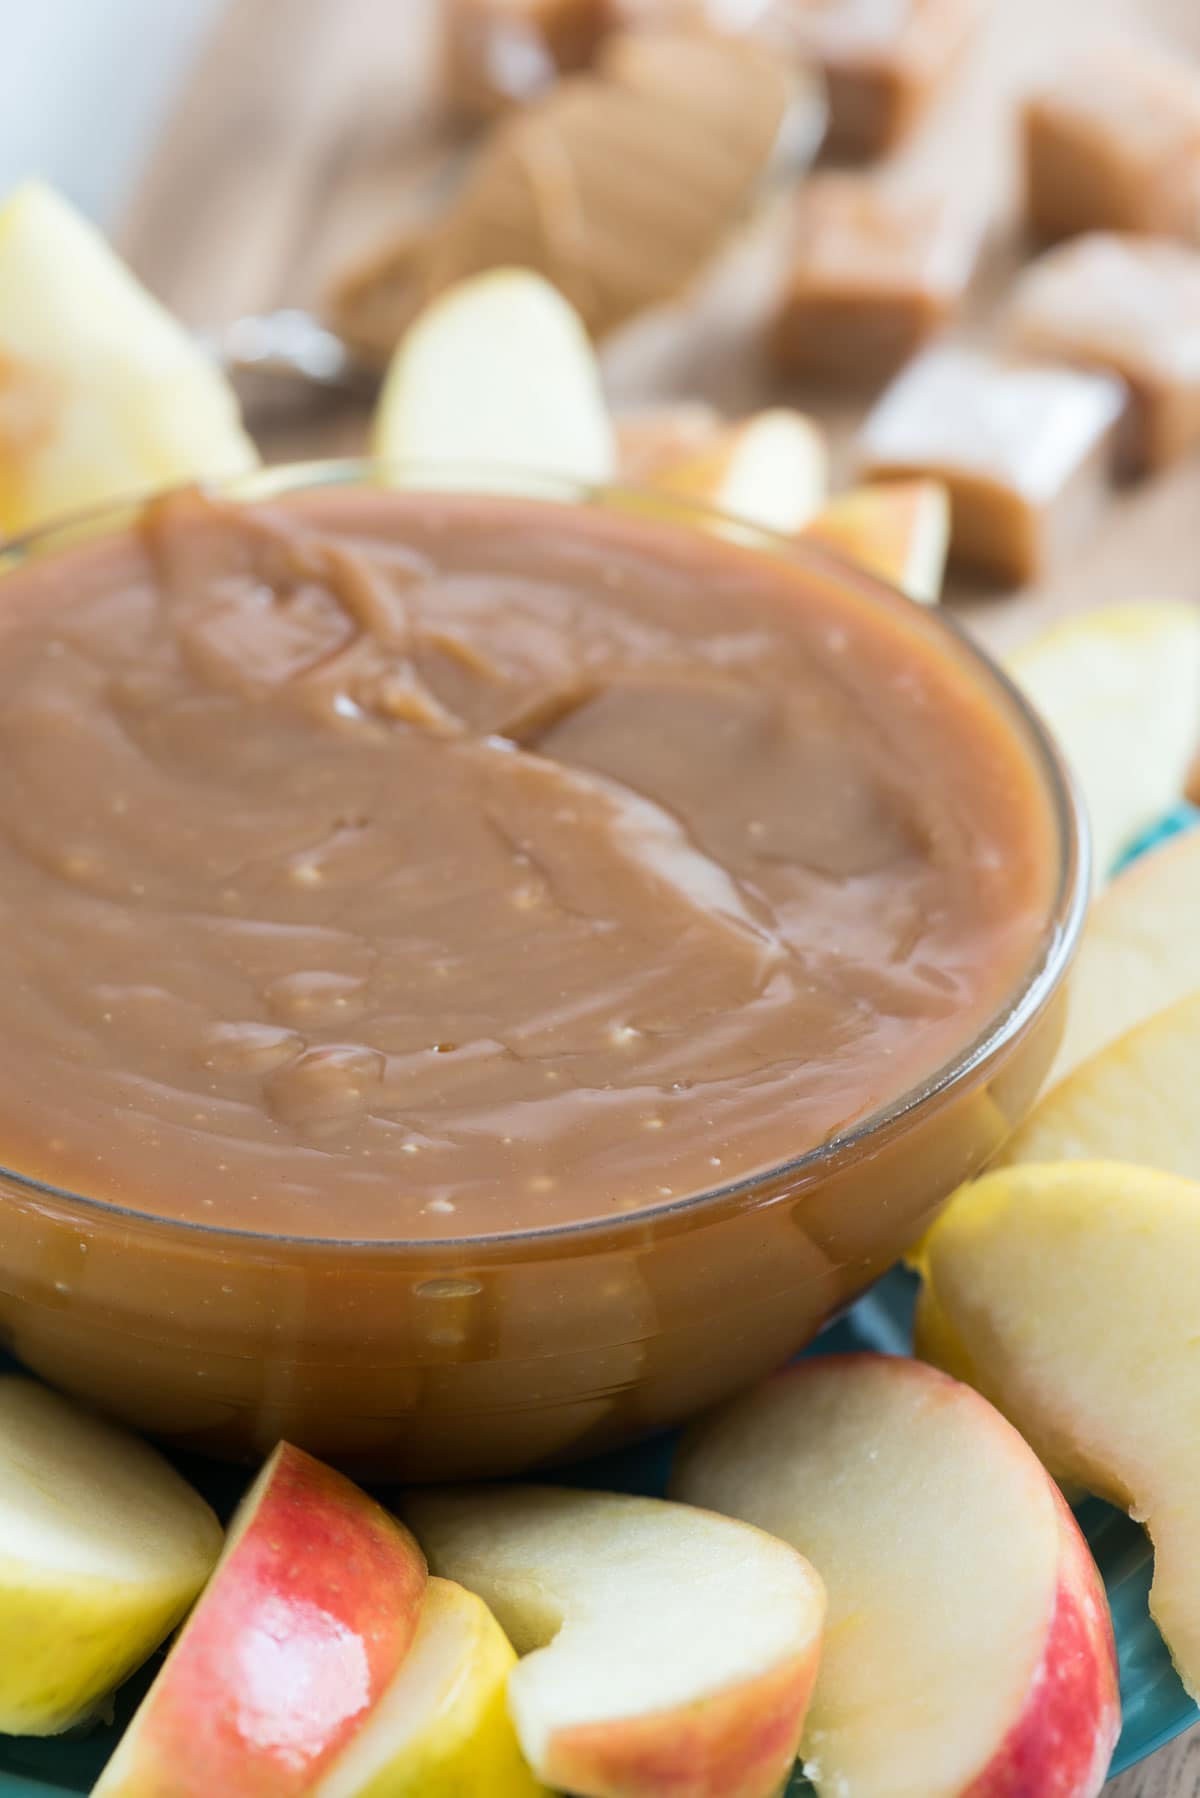 EASY Peanut Butter Caramel Apple Dip - this recipe has only 3 ingredients and is the perfect dip for apples or fruit!